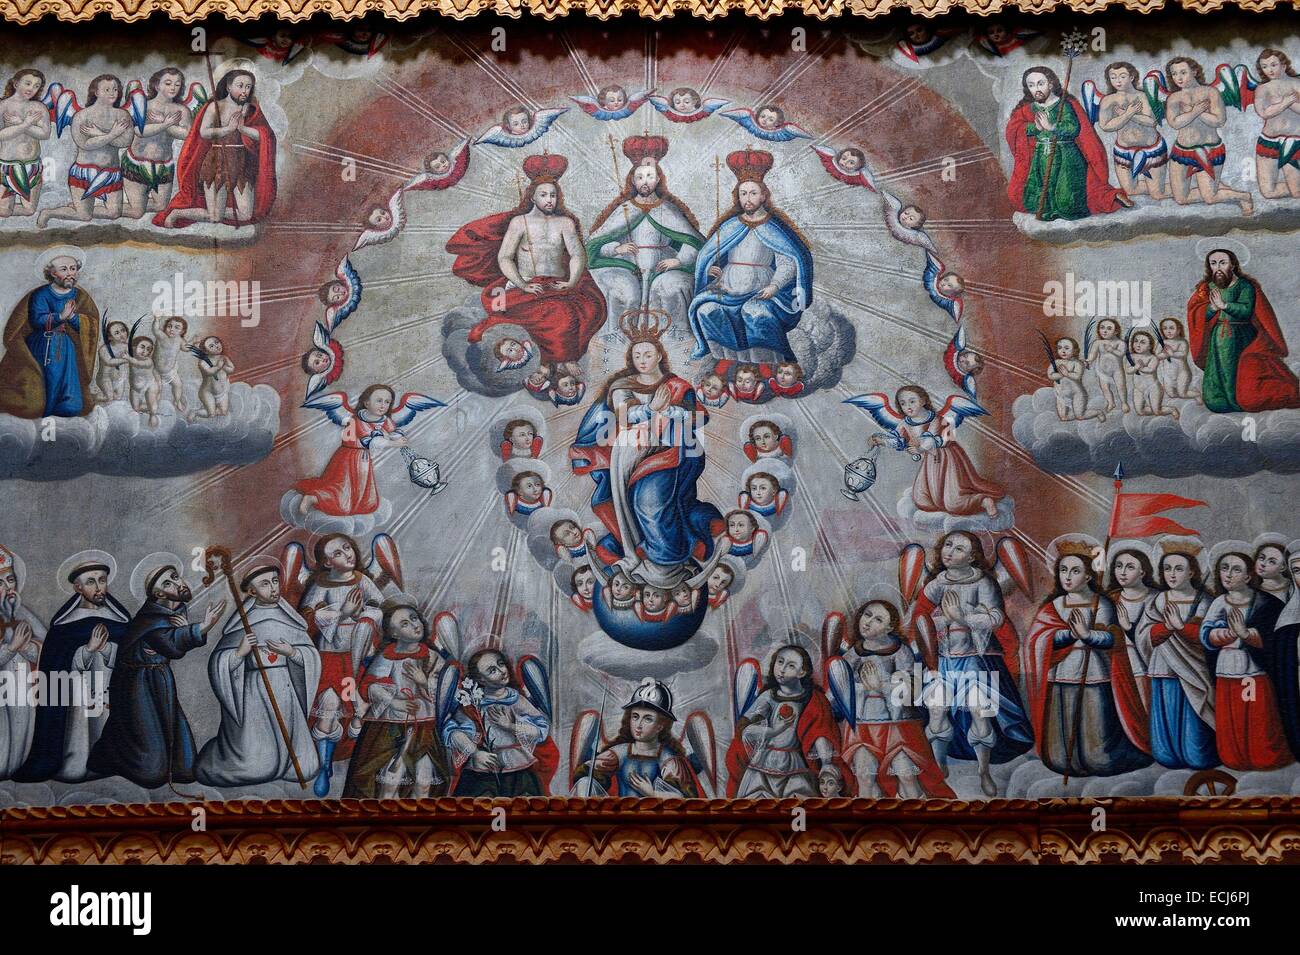 Peru, Caylloma Province, Colca Canyon, Lari, the 18th century Cathedral of the Colca Valley, painting of Coronation of the Virgin of the Holy Trinity Stock Photo